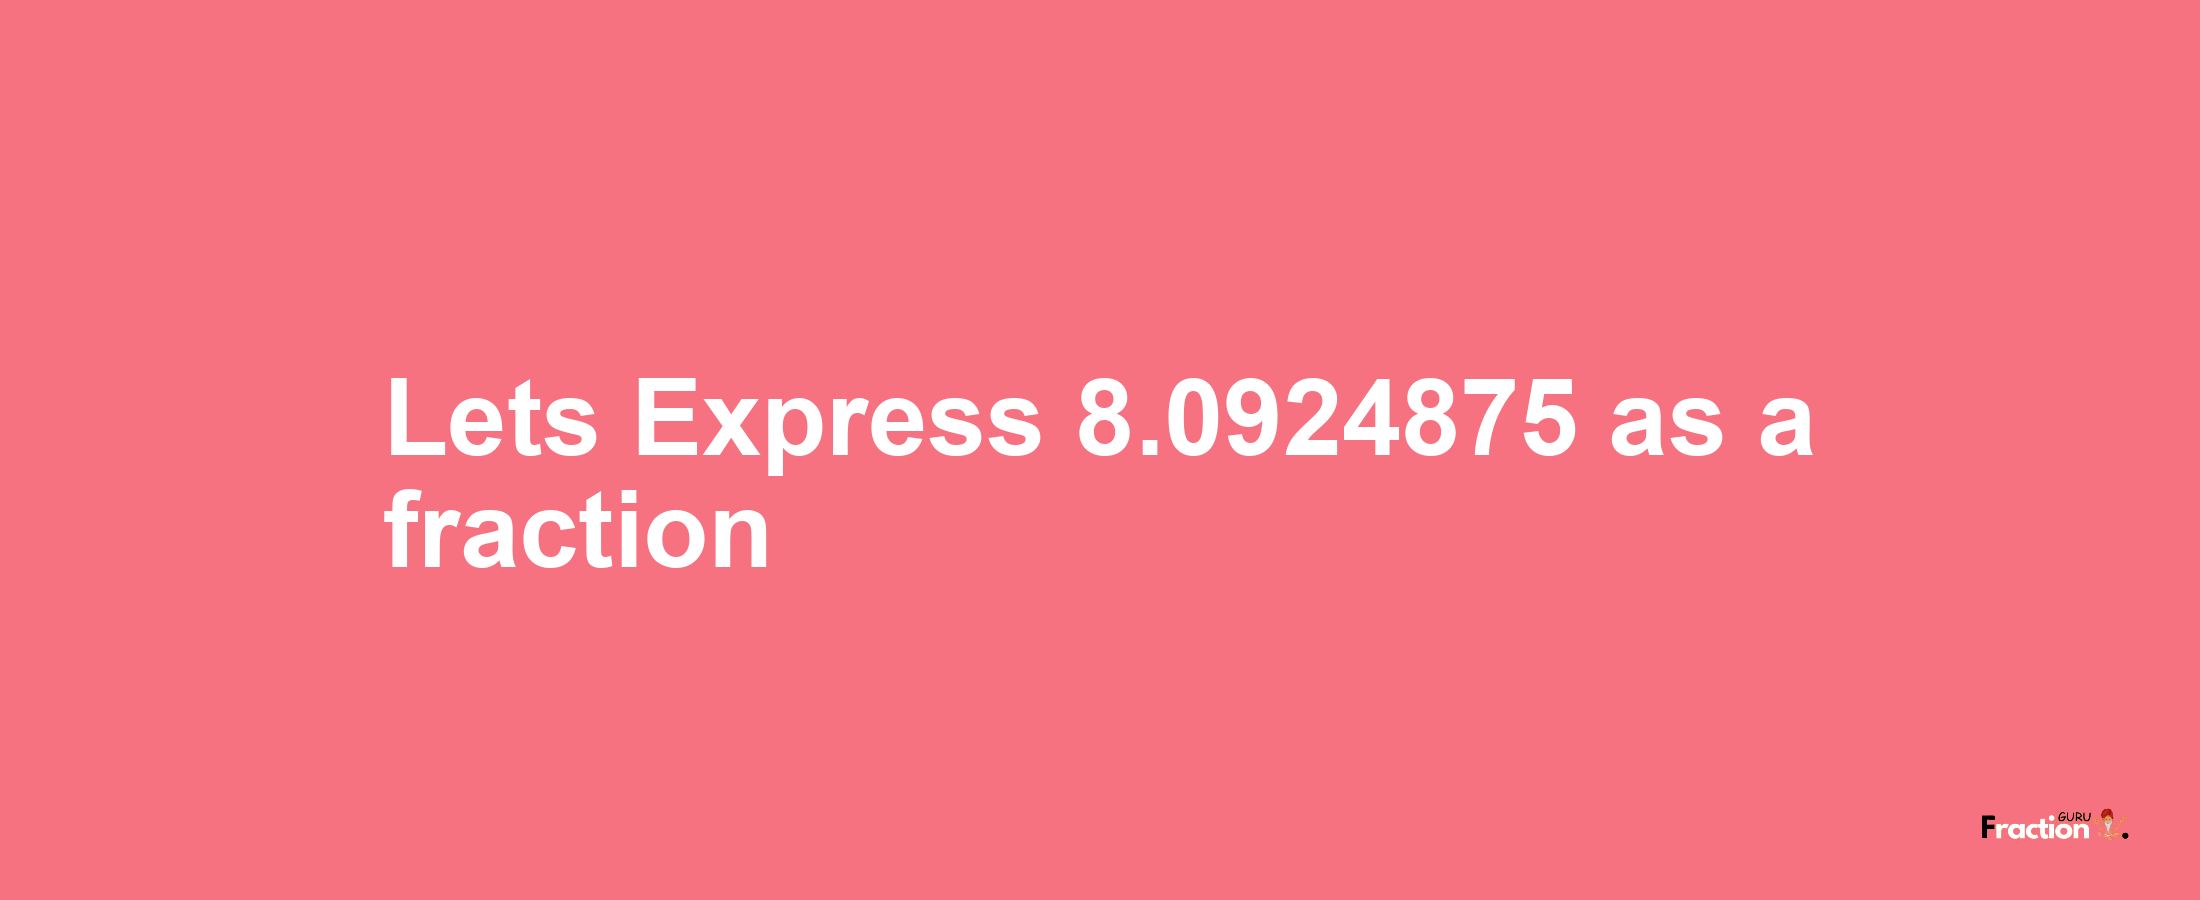 Lets Express 8.0924875 as afraction